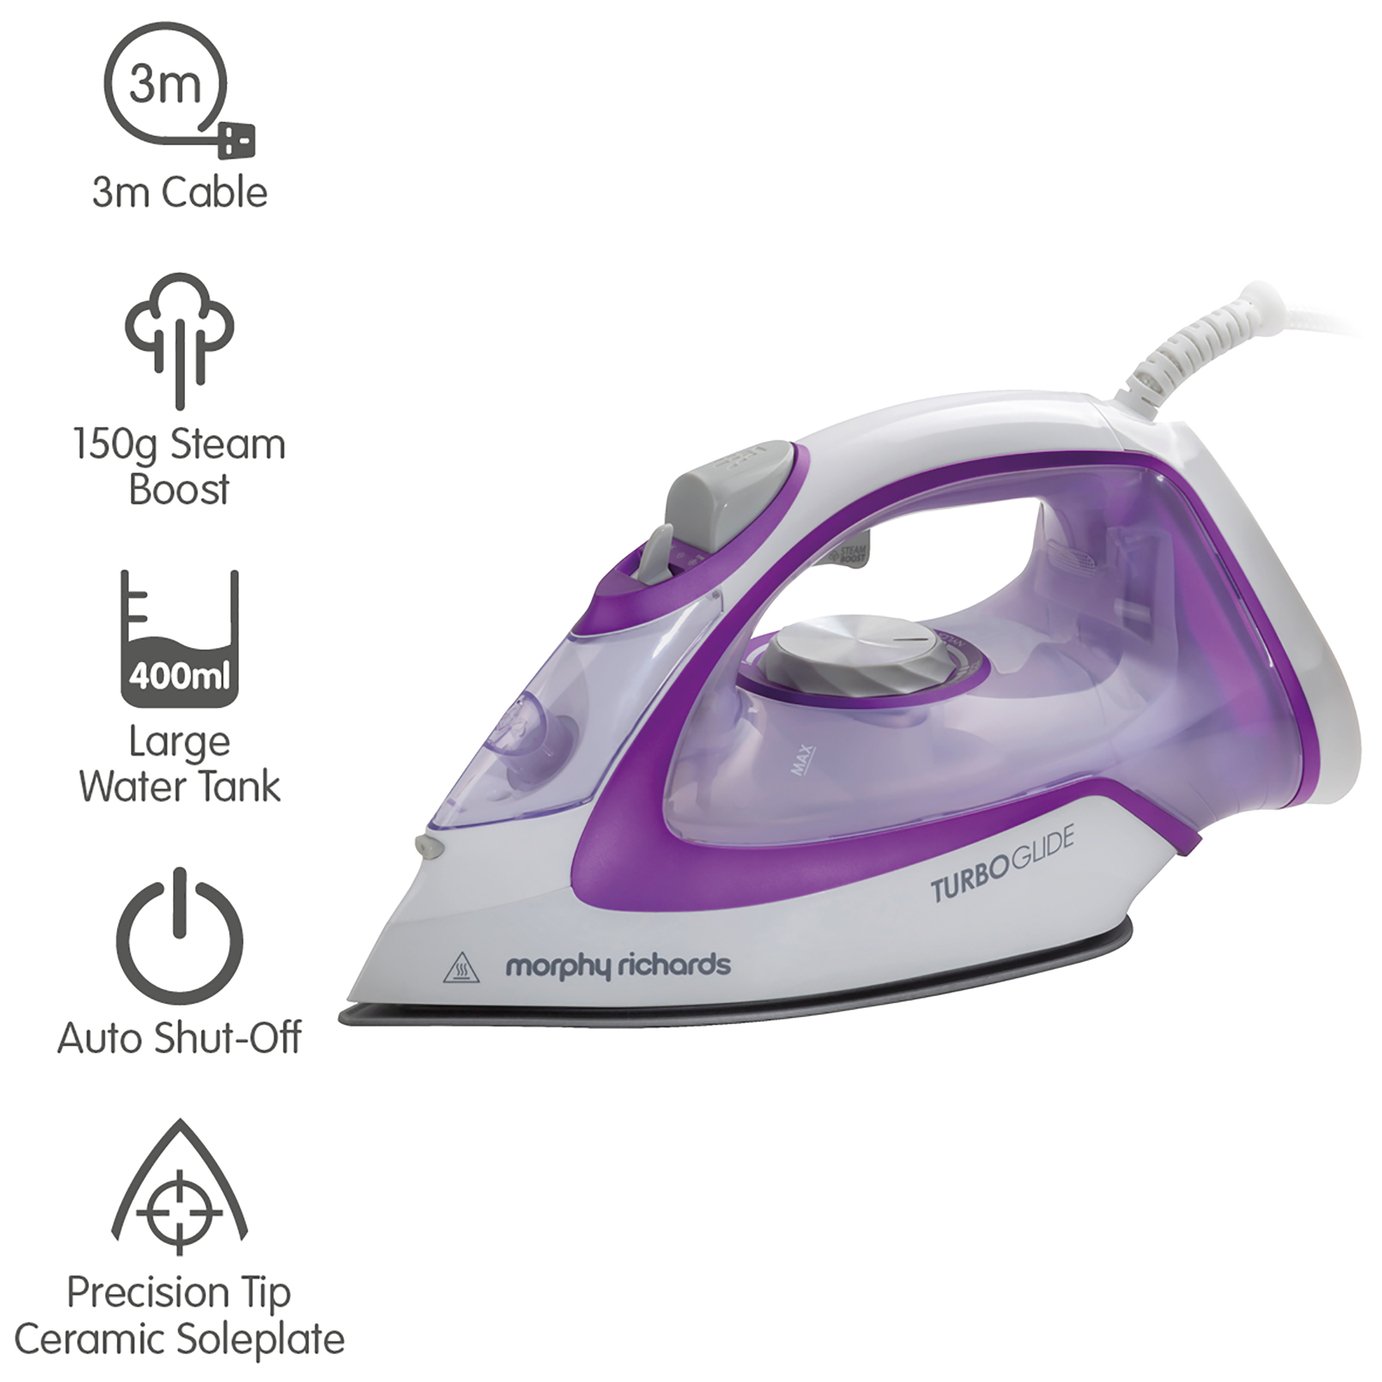 Morphy Richards 302000 Turbo Glide Steam Iron Review